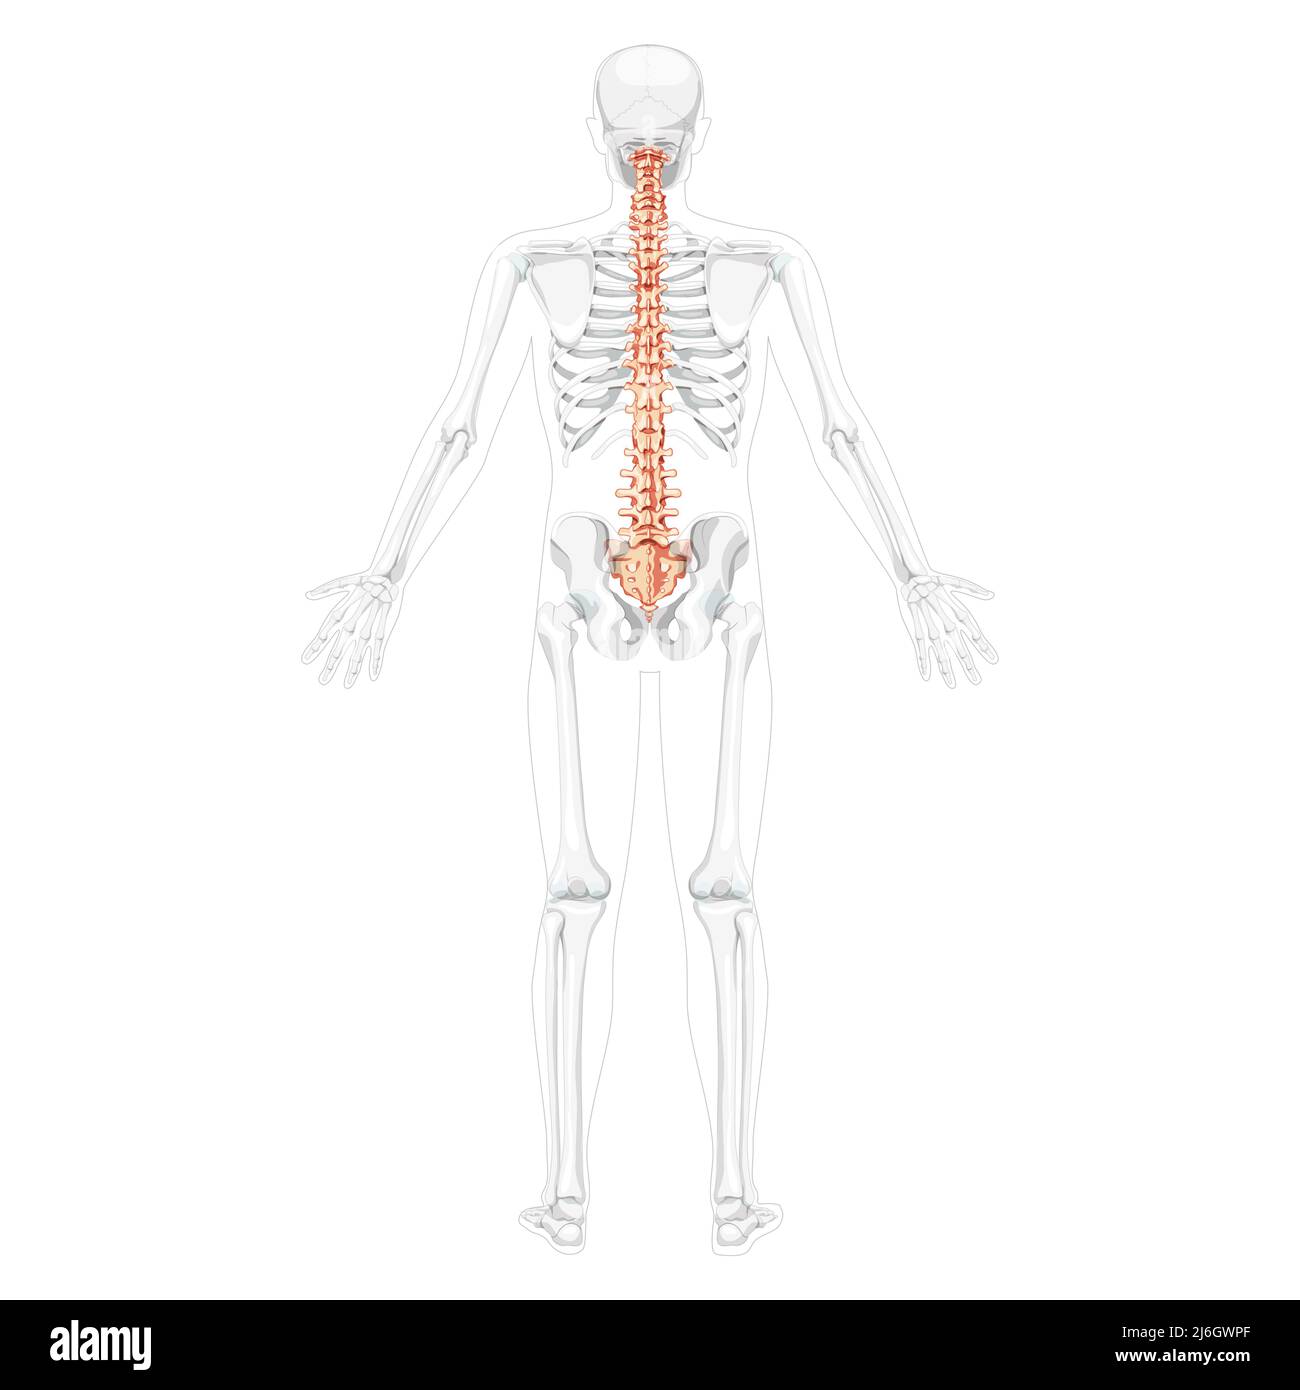 Human vertebral column back posterior view with partly transparent skeleton position, spinal cord, thoracic lumbar spine, sacrum and coccyx. Vector flat, realistic isolated illustration anatomy  Stock Vector